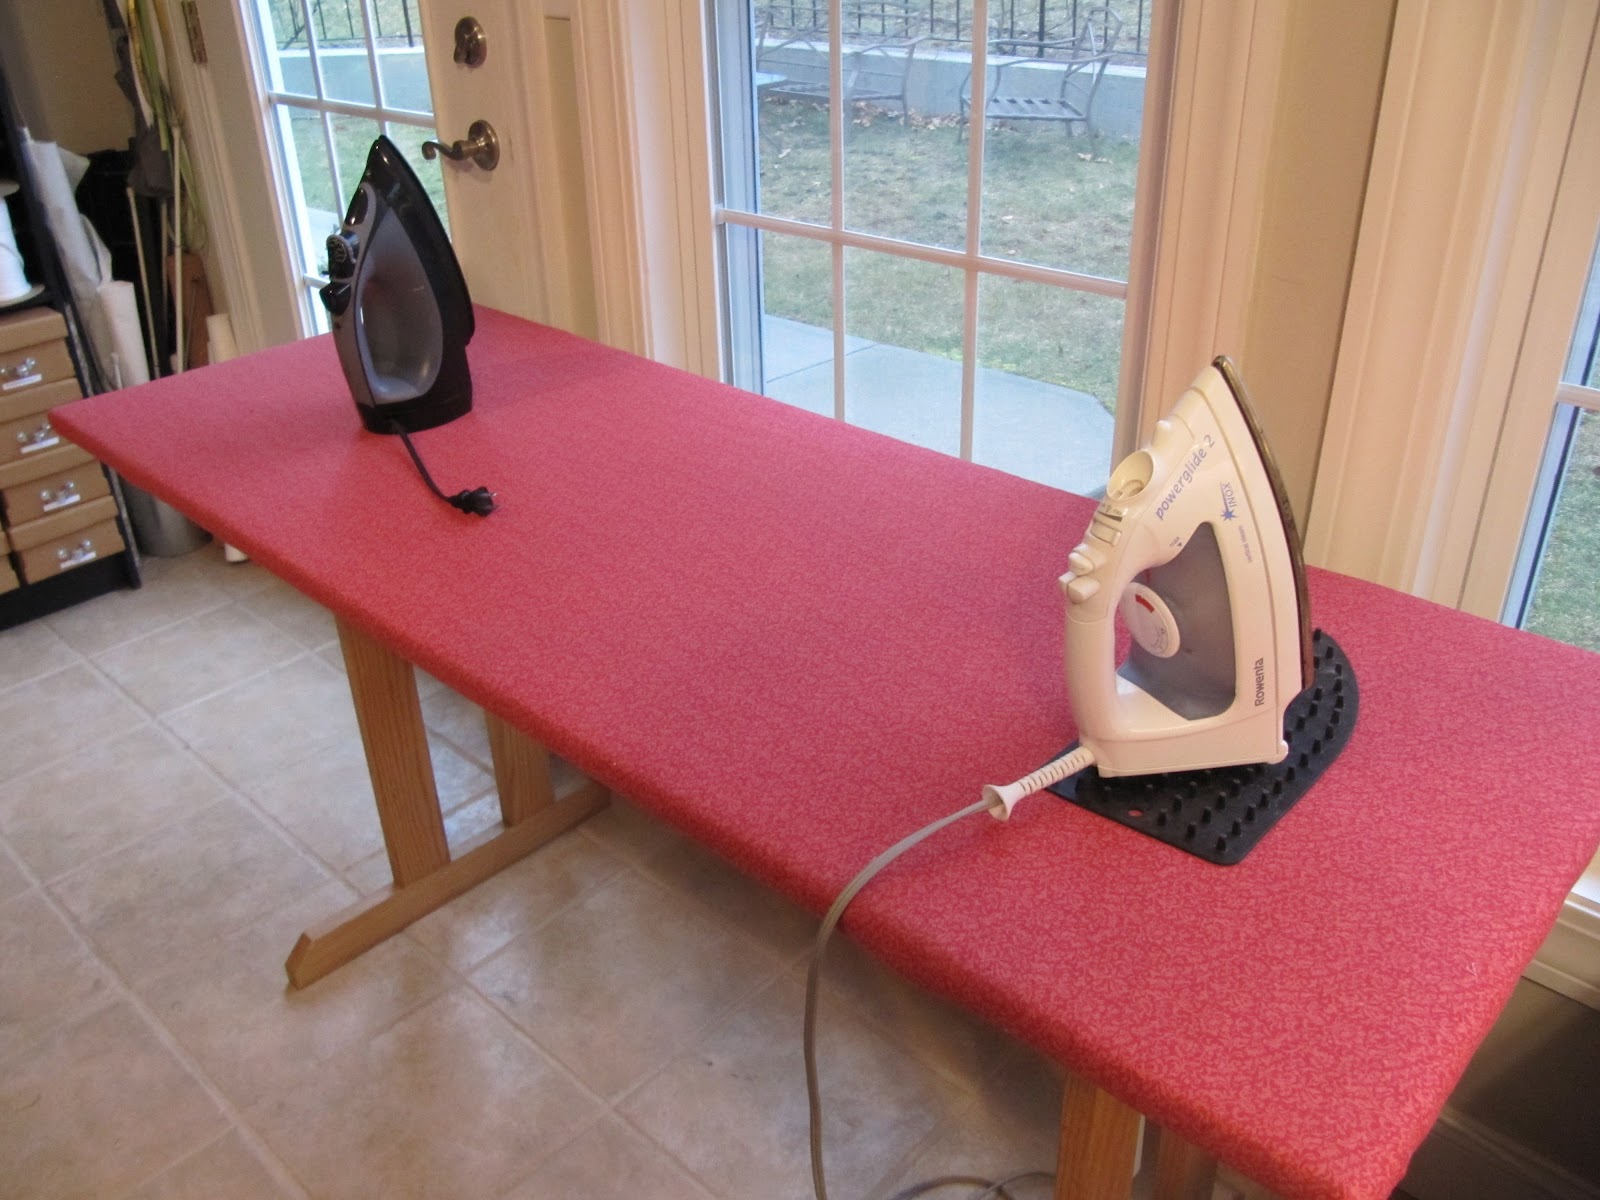 Wool Ironing Mat Review - Comparisons With an Ironing Board